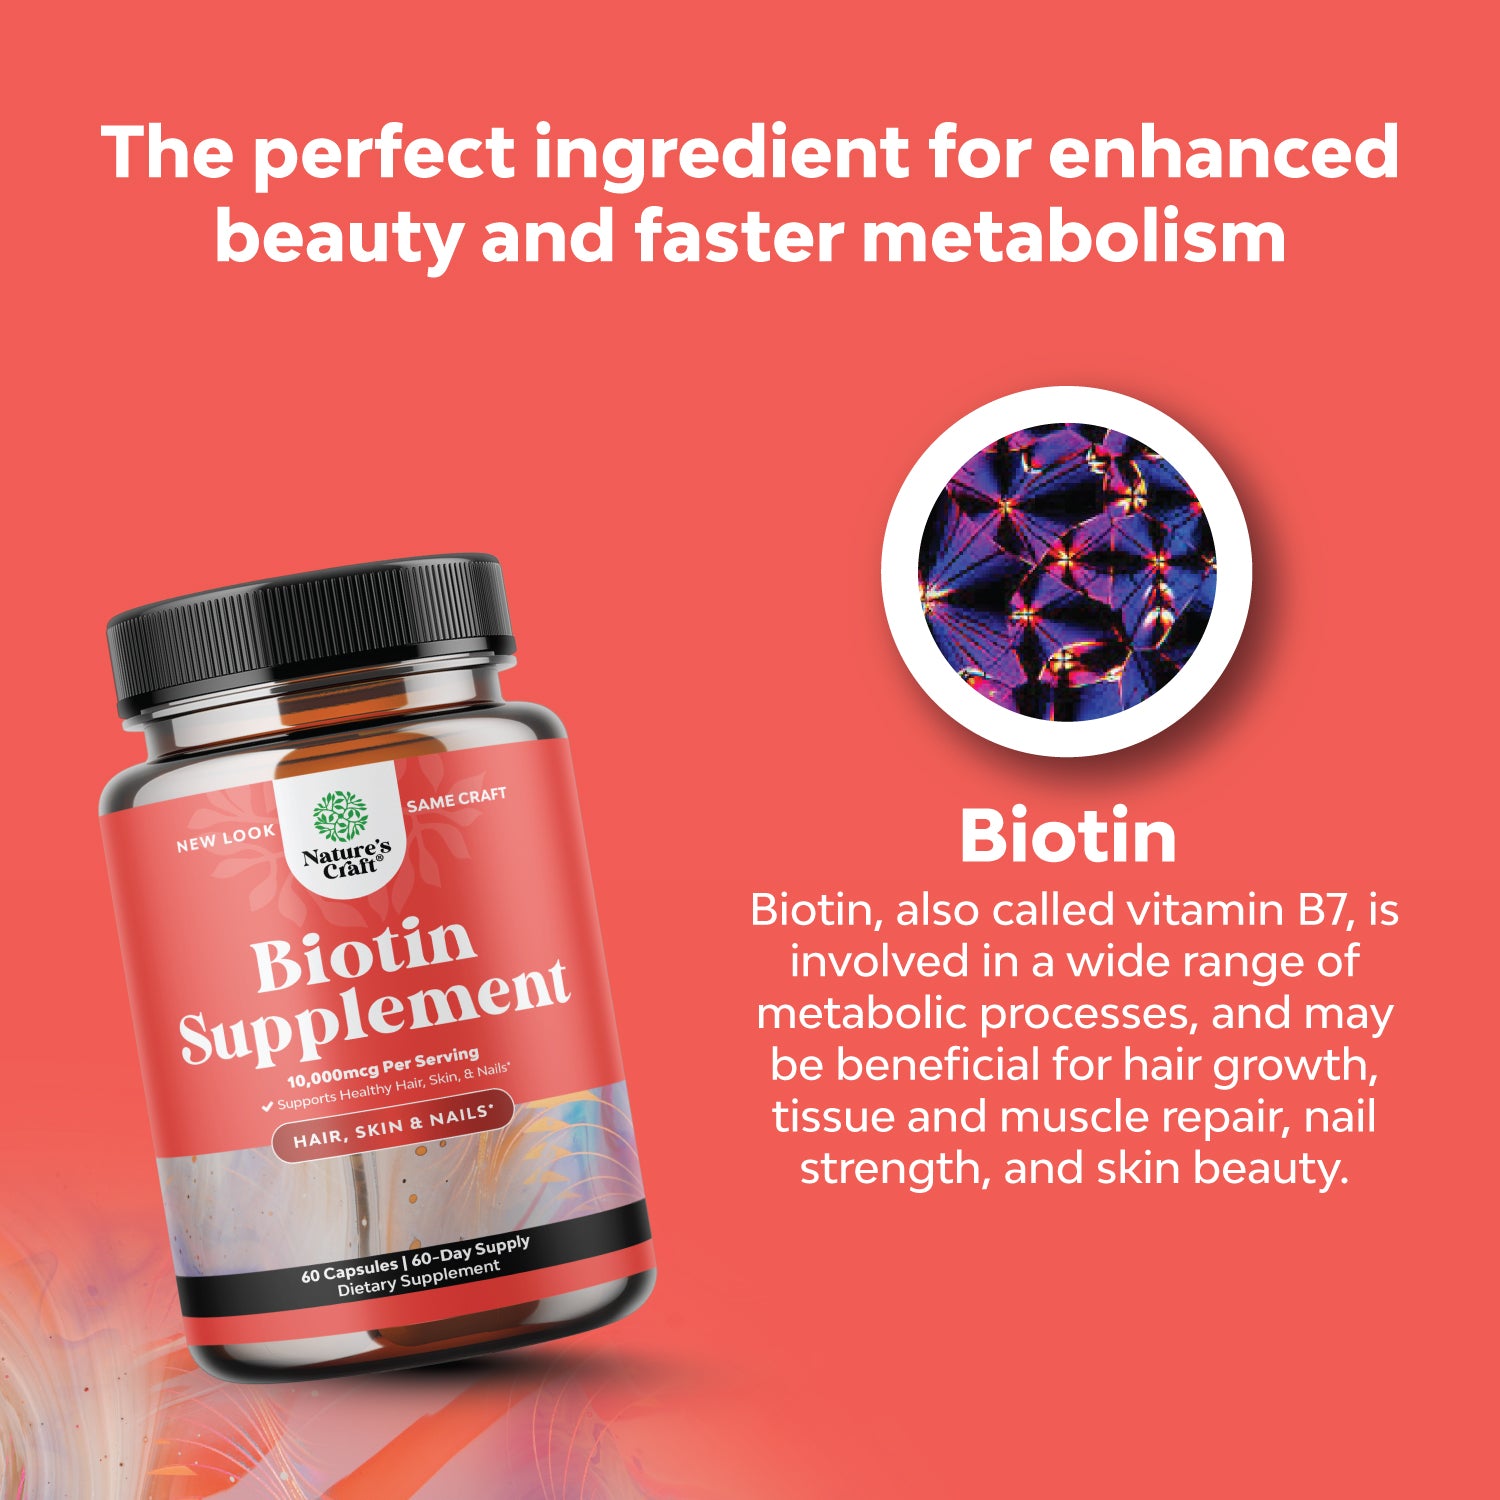 Best Biotin, Supports Healthy Hair, Skin & Nails Tablets for Hair Growth in  Pakistan....! https://vitamindeck.com.pk/products/supplements... | Instagram